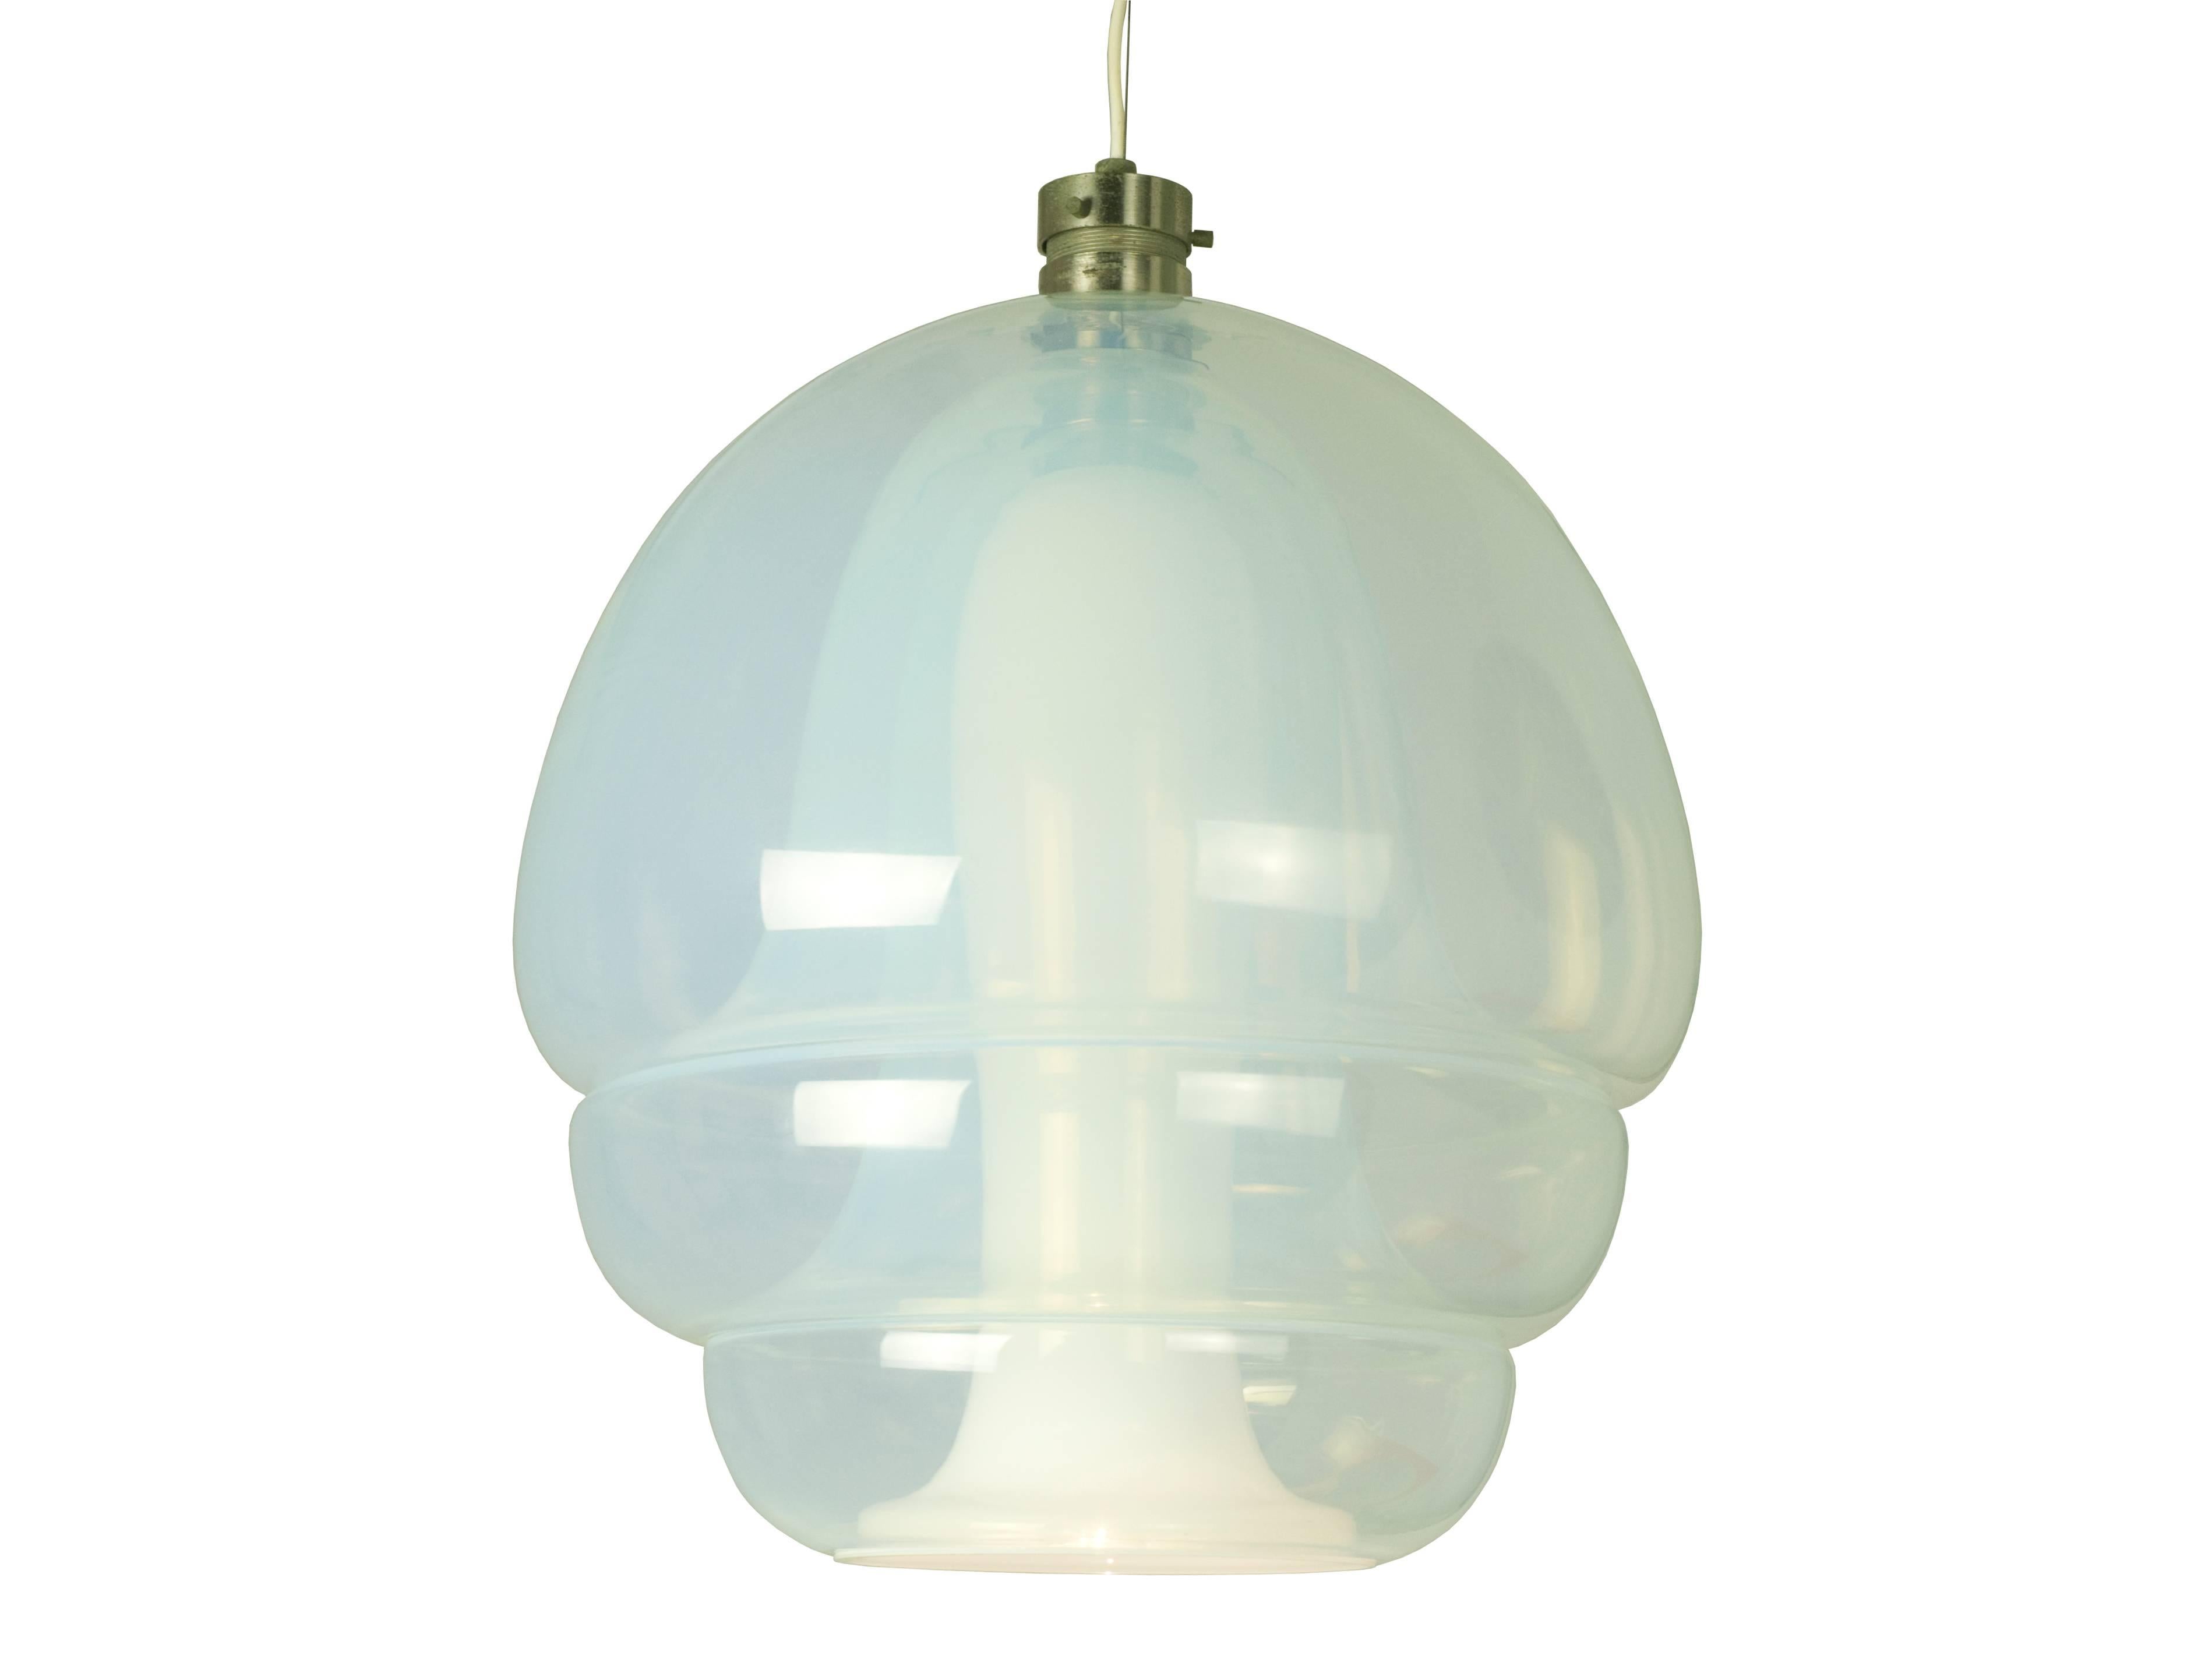 Extremely rare Italian blown milk glass chandelier by Carlo Nason for Mazzega. This Model LS 134, also called 